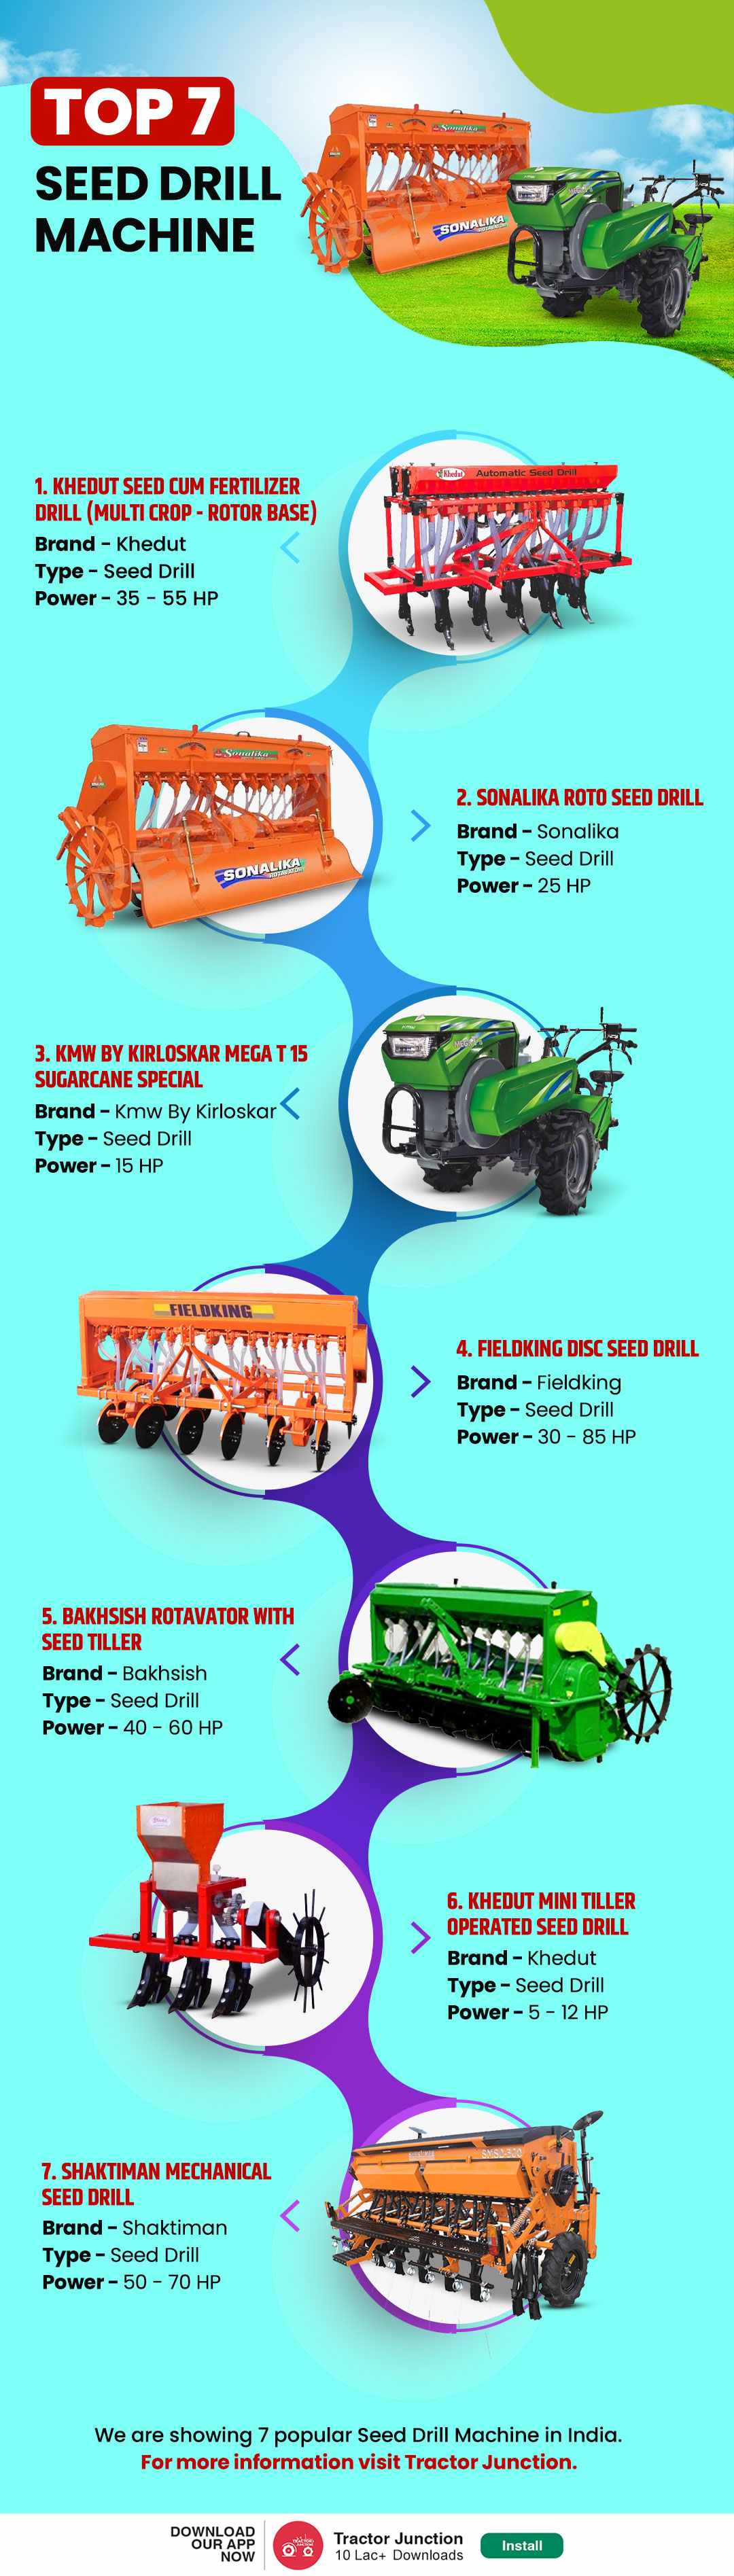 Top 7 Seed Drill Machine infographic